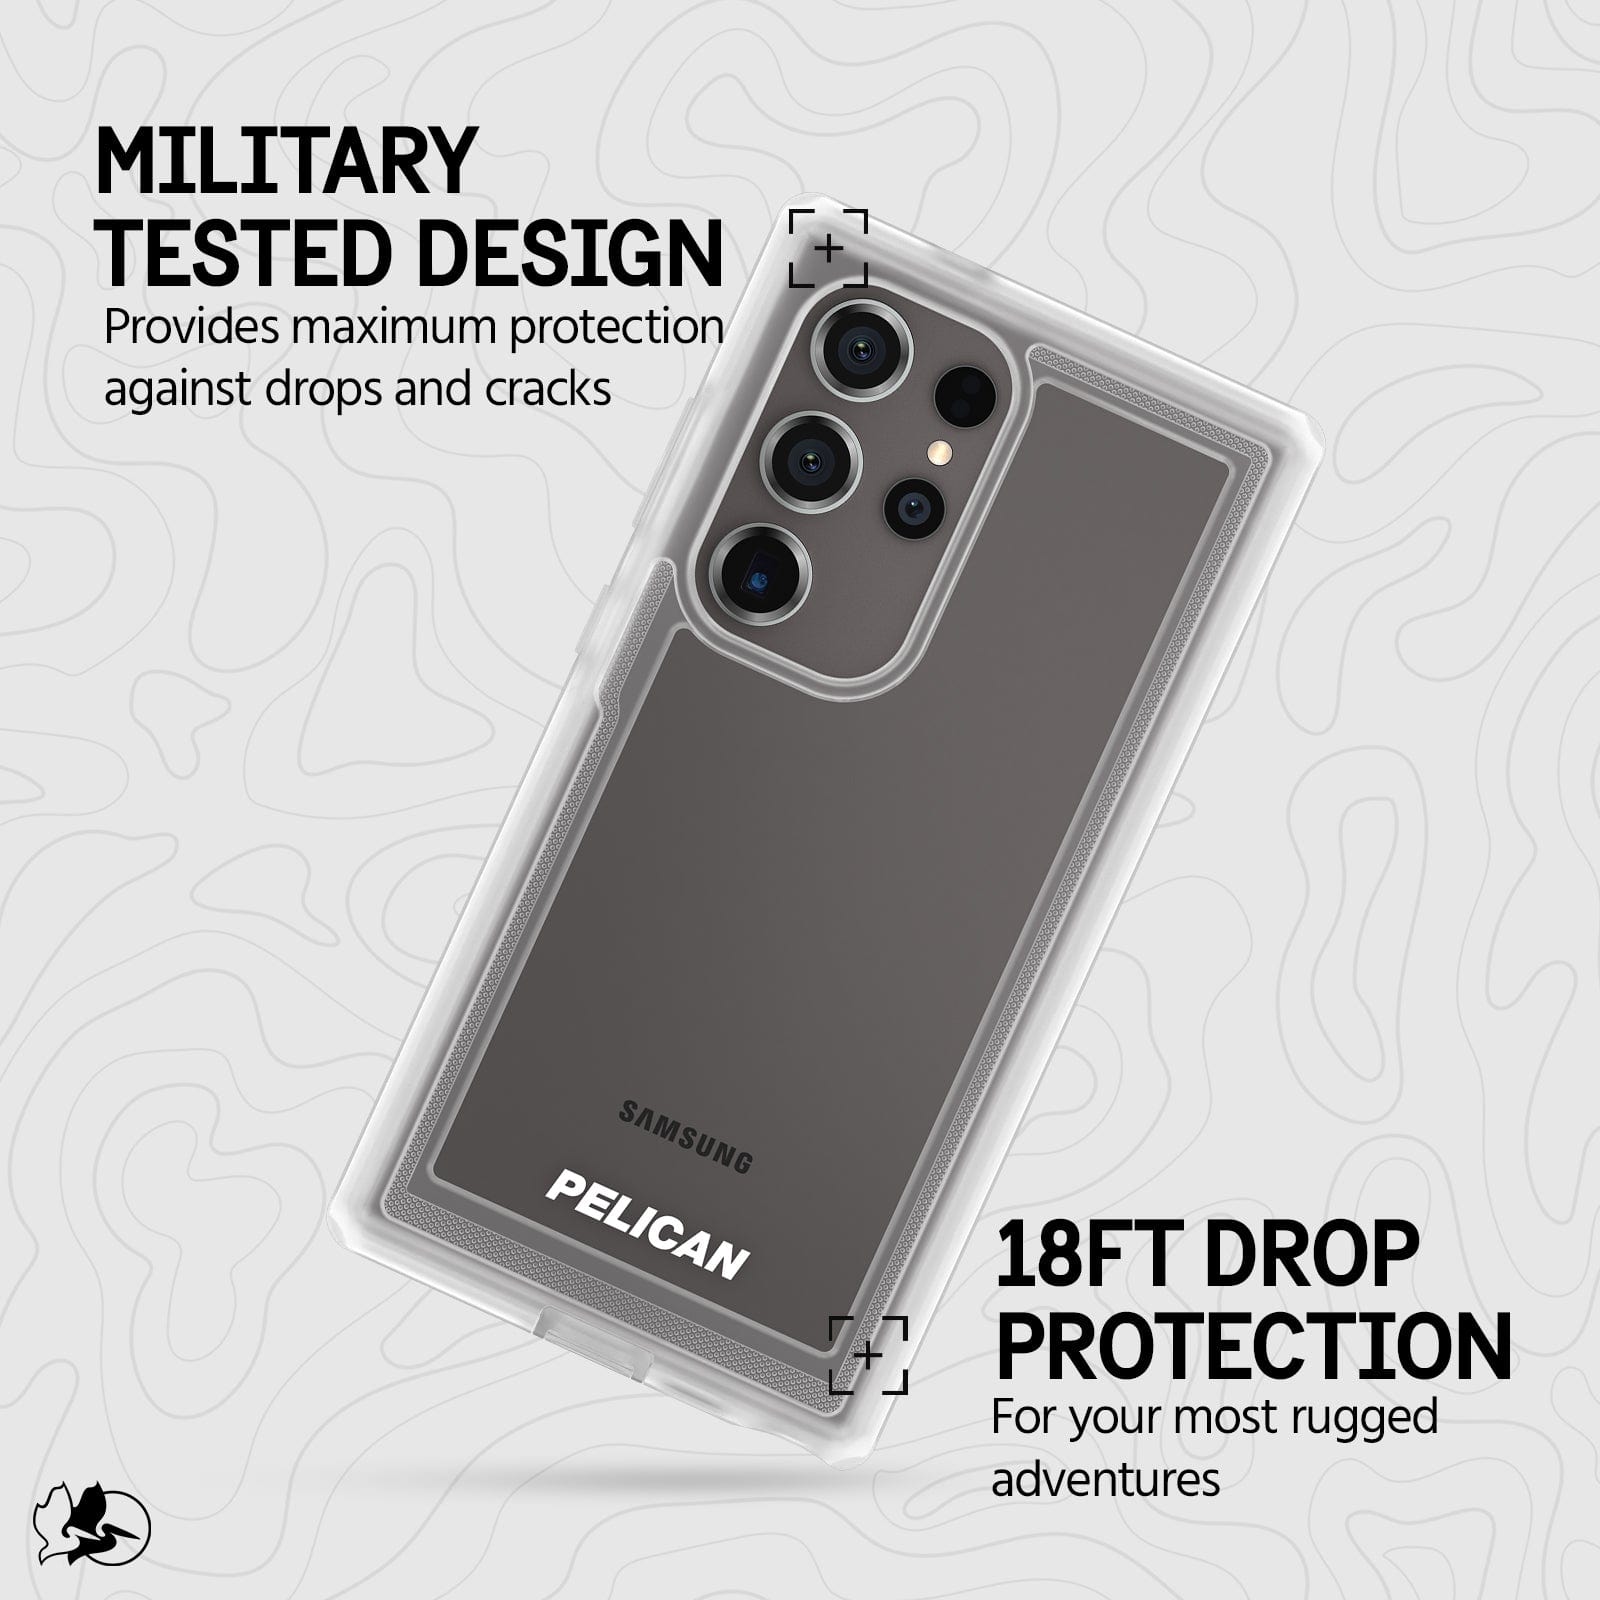 MILITARY TESTED DESIGN PROVIDES MAXIMUM PROTECTION AGAINST DROPS AND CRACKS. 18FT DROP PROTECTION FOR YOUR MOST RUGGED ADVENTURES